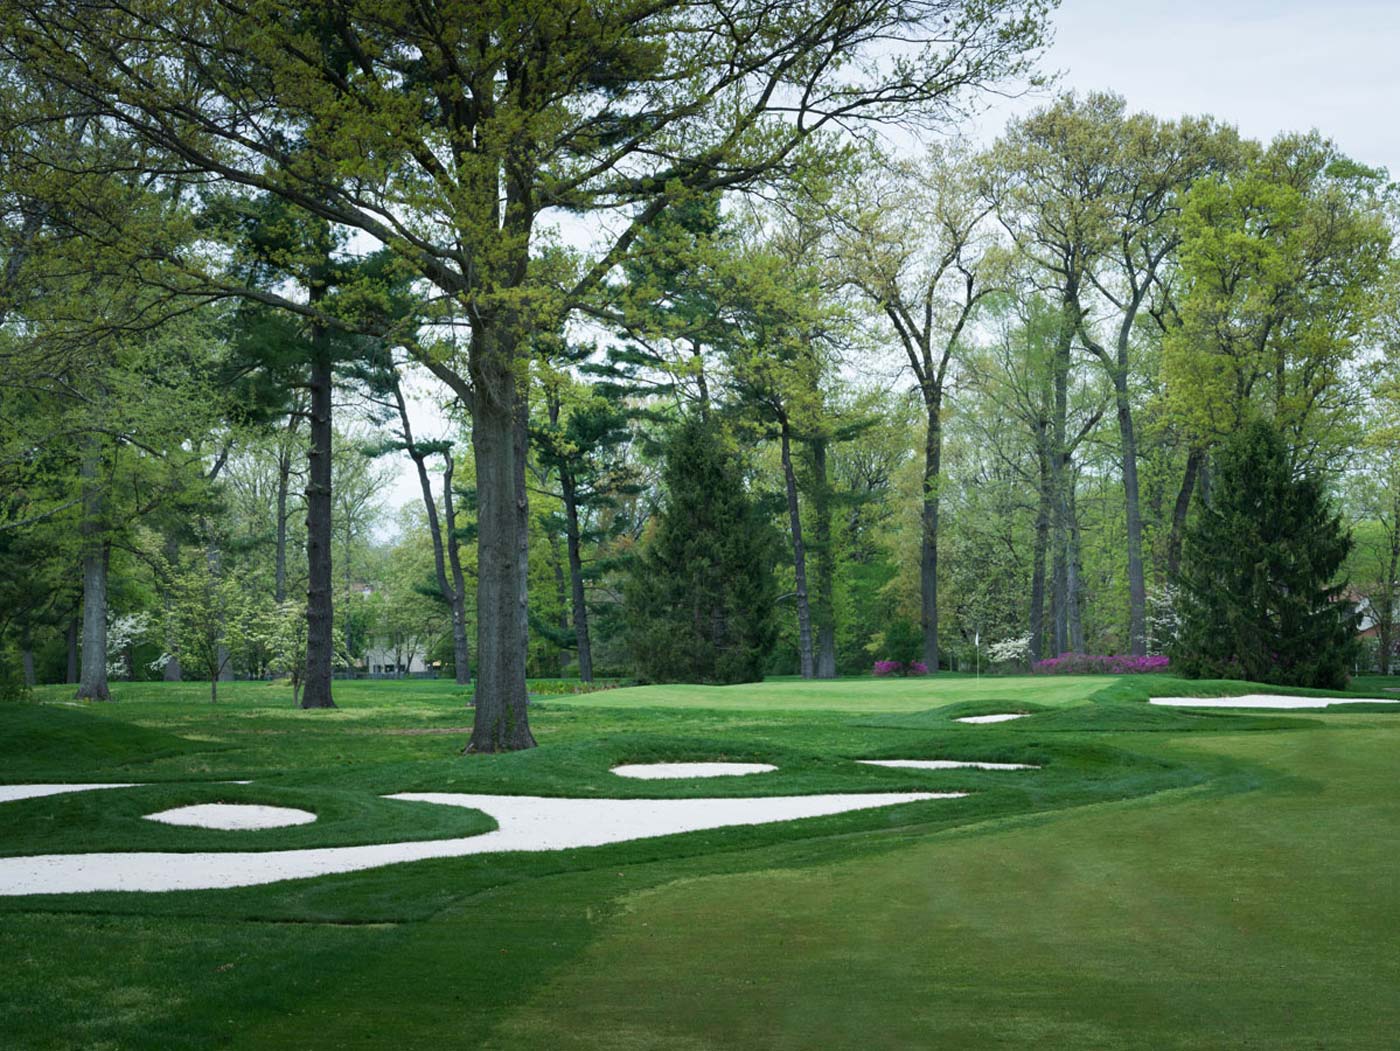 Cobblestone Creek Country Club, Lawrenceville, NJ, BWGD is a leader in golf course repurposing – a means to update layouts through redesign of partial acreage for higher value land uses.